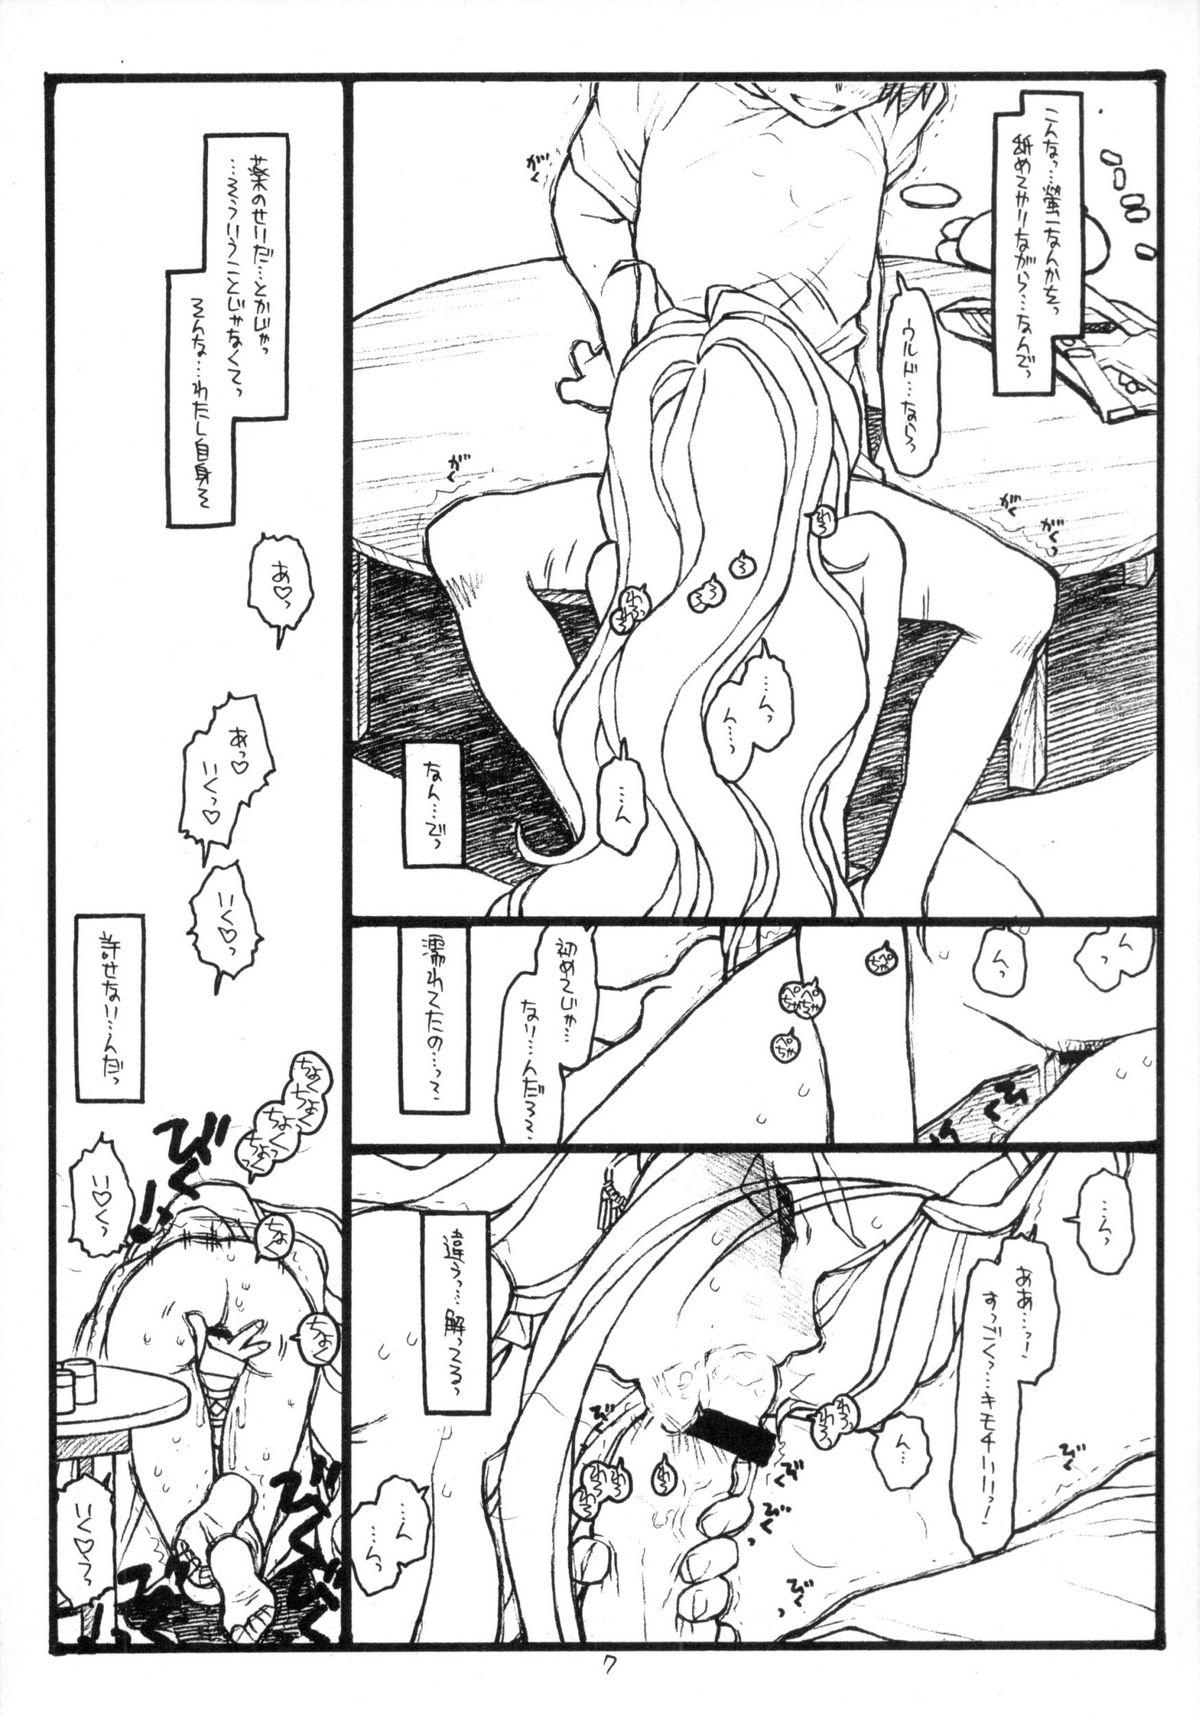 Oil Oh My Sadness Episode #6.1 - Ah my goddess Pigtails - Page 6